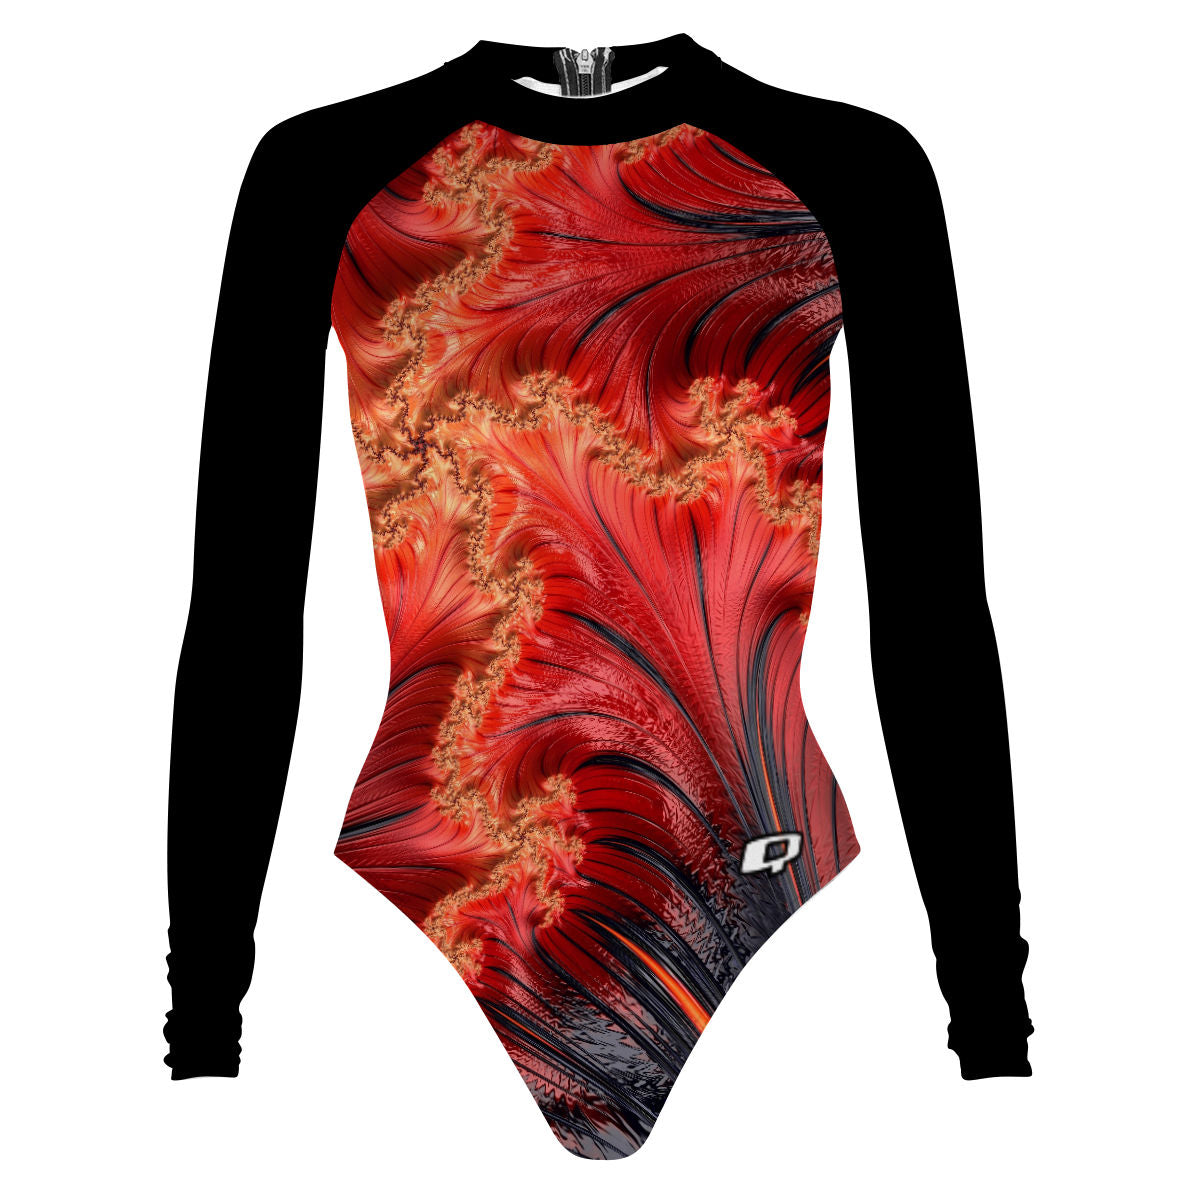 Fiery Fractals - Surf Swimming Suit Classic Cut